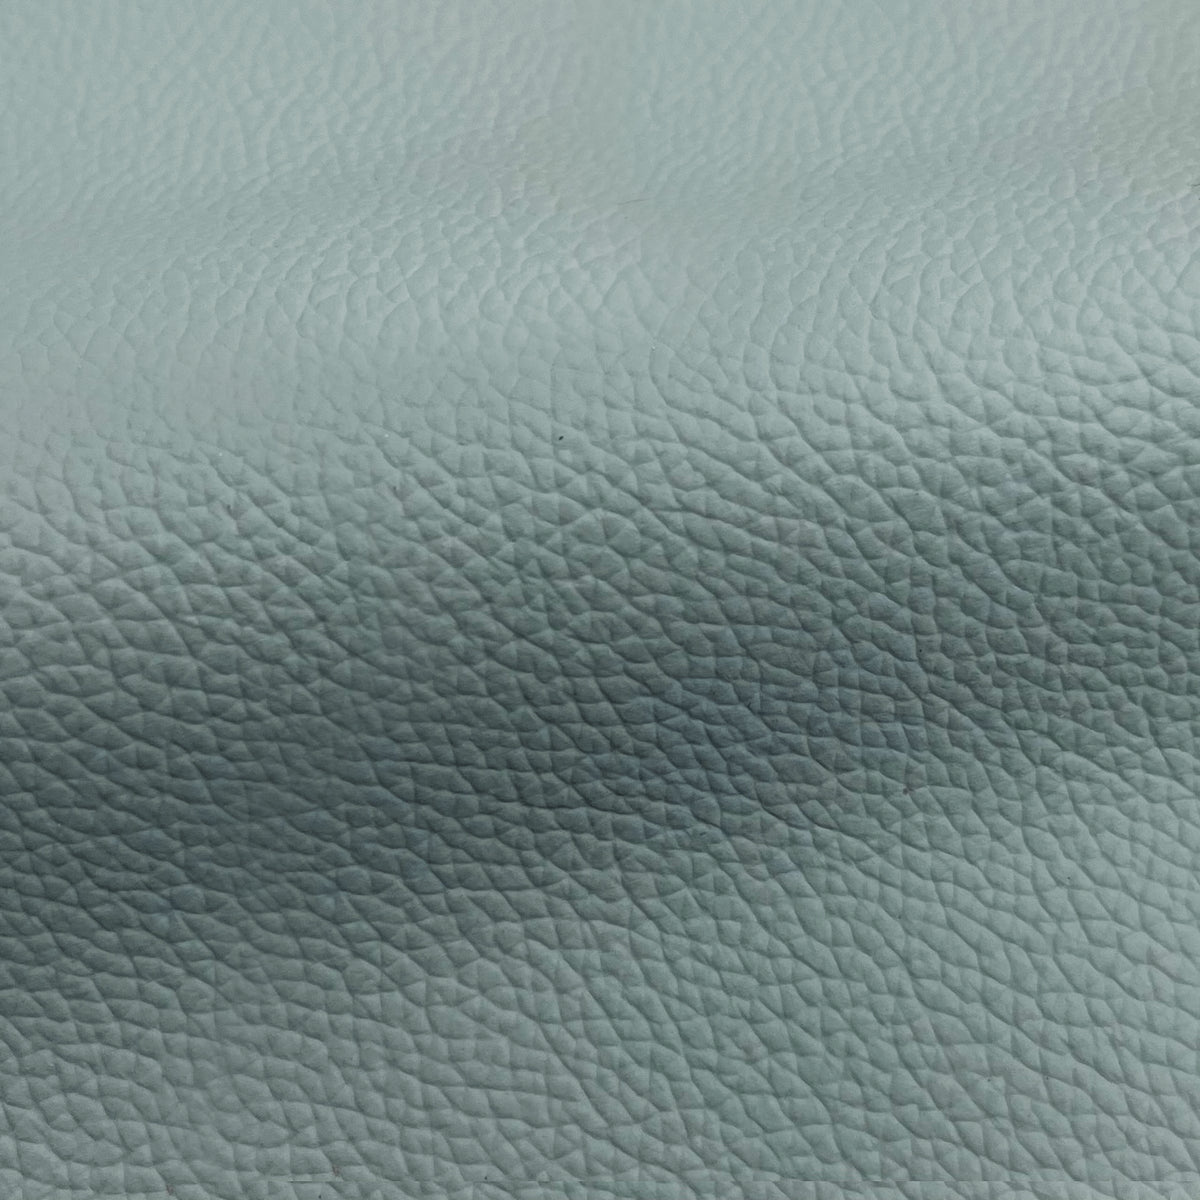 New World Upholstery Cow Leather